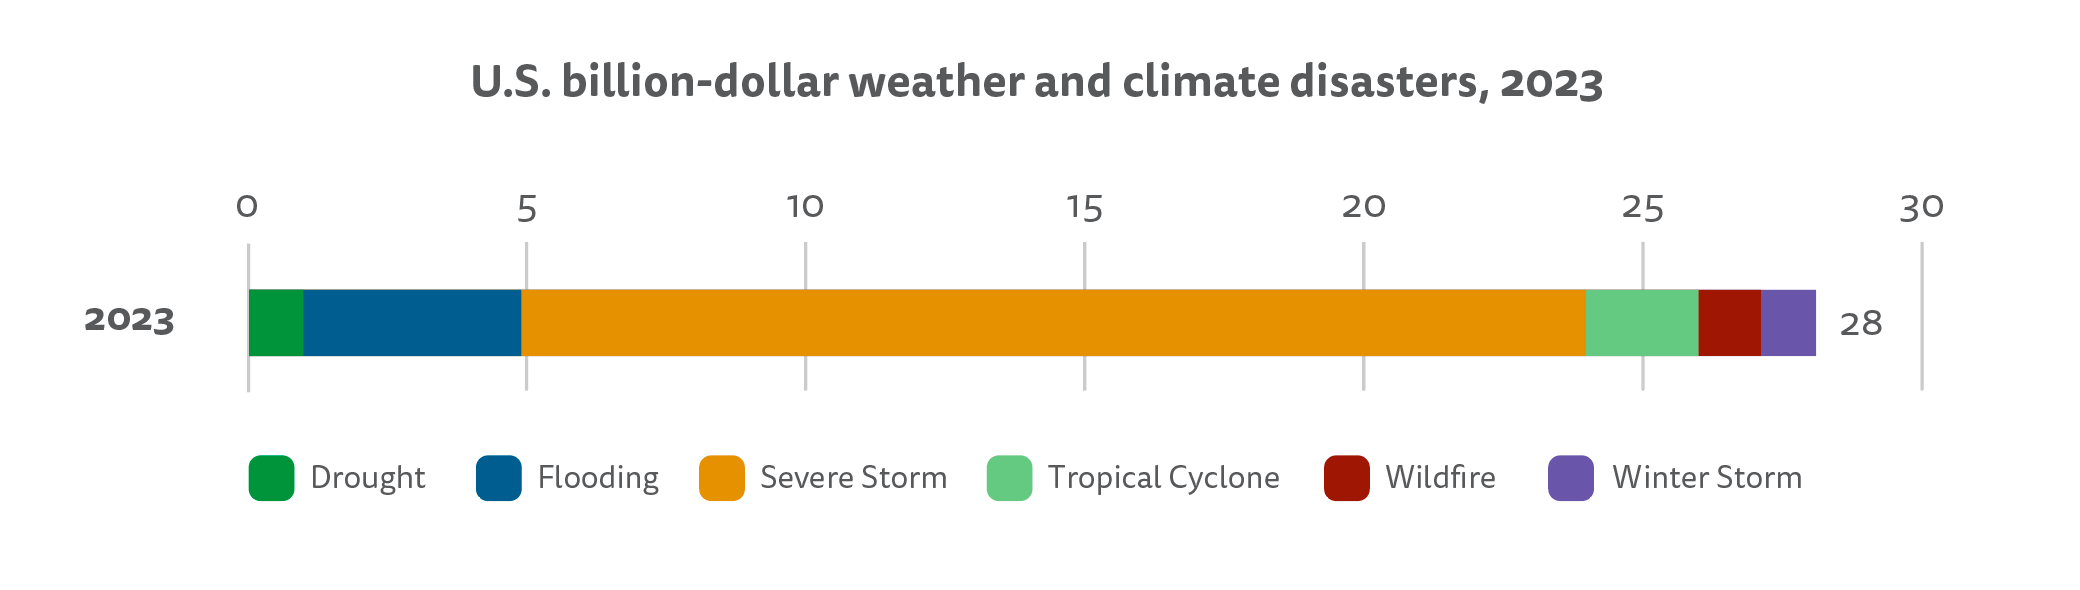 Weather Disasters in 2023